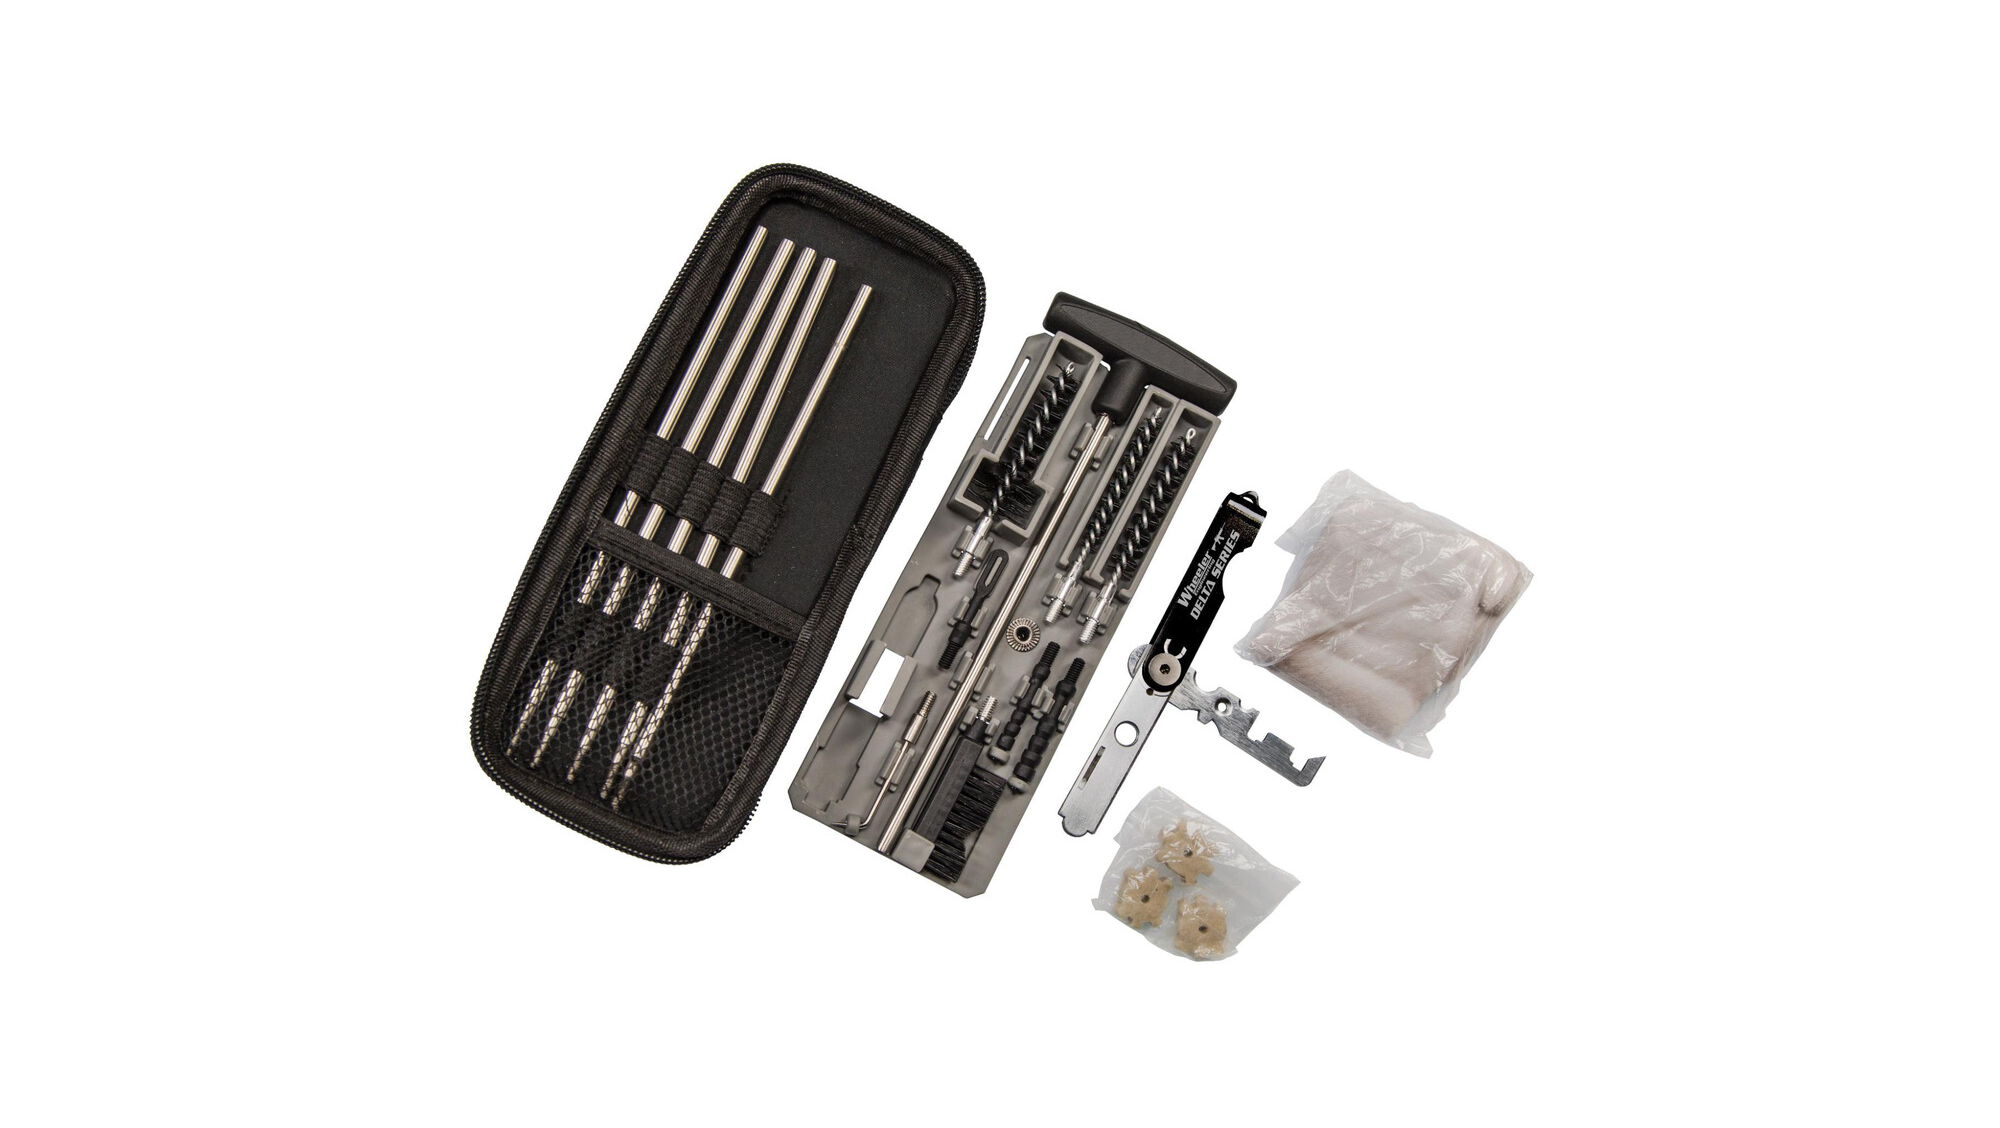 Wheeler Compact Tactical Rifle Cleaning Kit - $35.19 after code "BENCH20" (Free S/H)